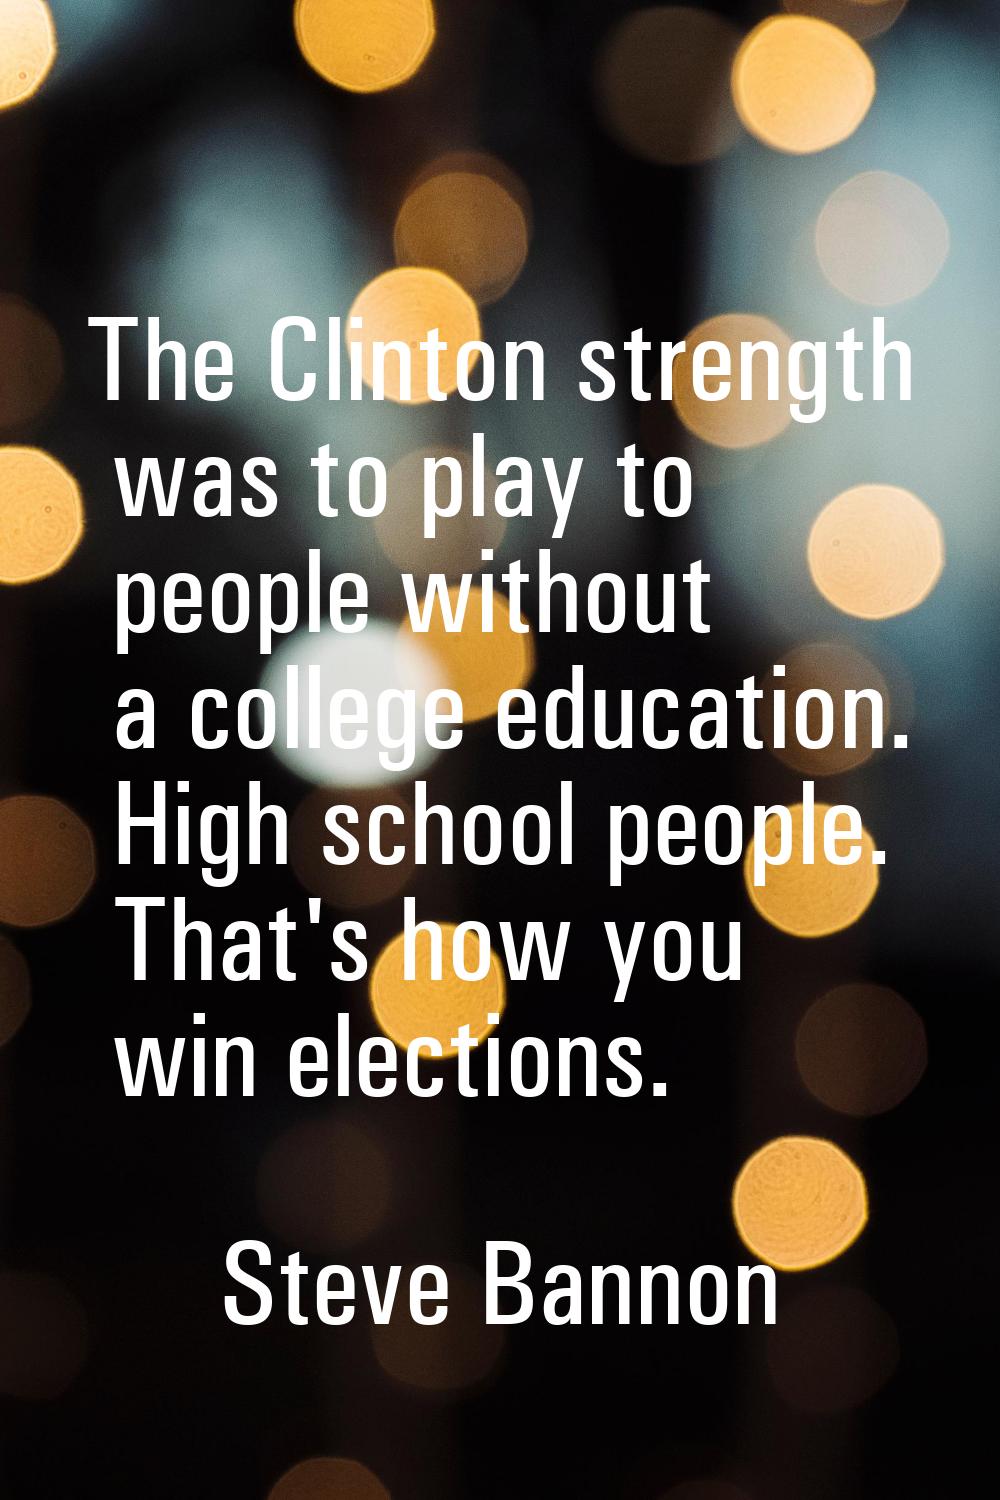 The Clinton strength was to play to people without a college education. High school people. That's 